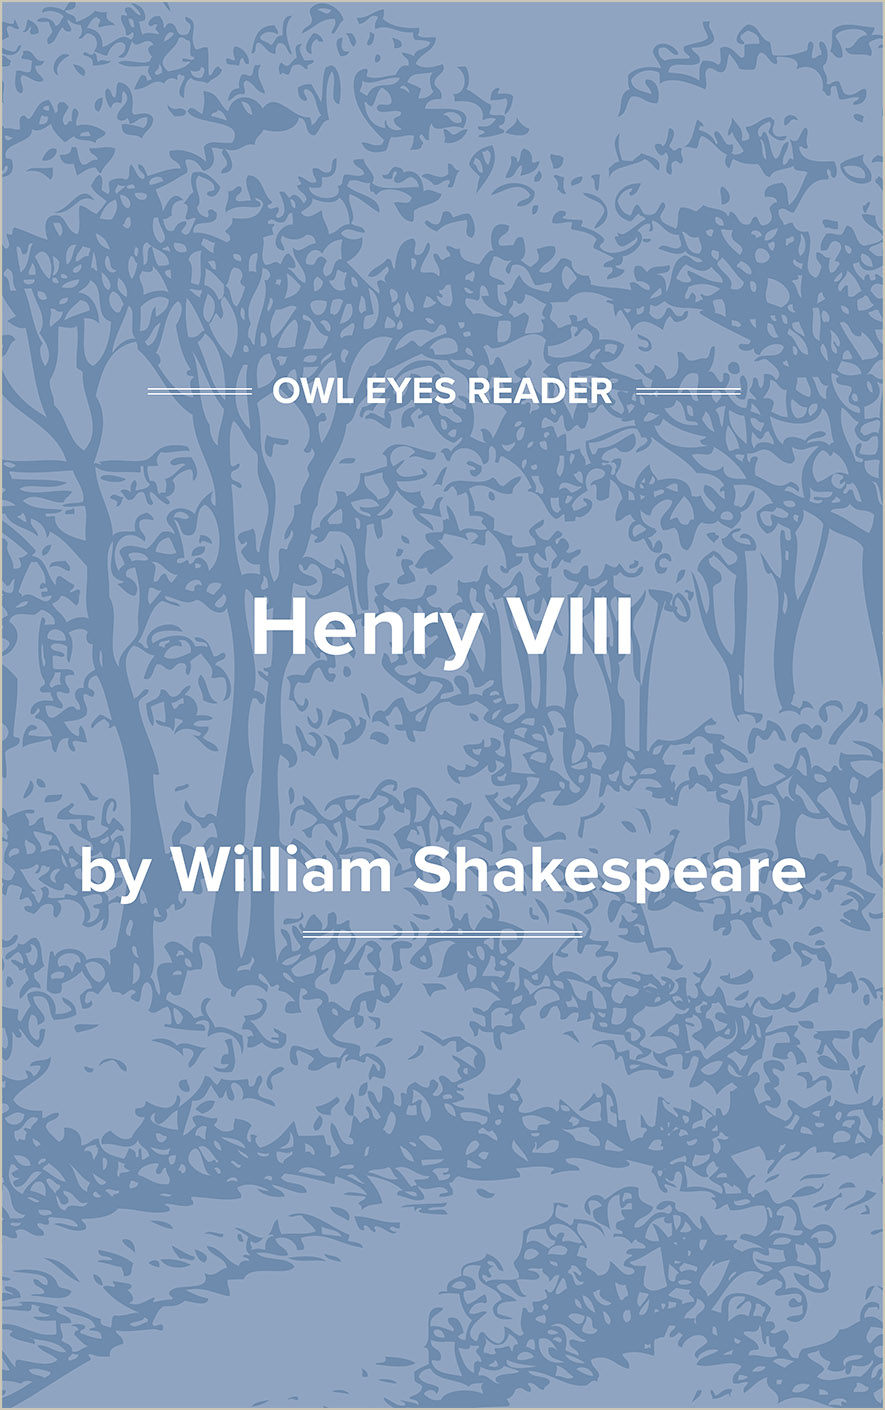 Henry VIII Cover Image